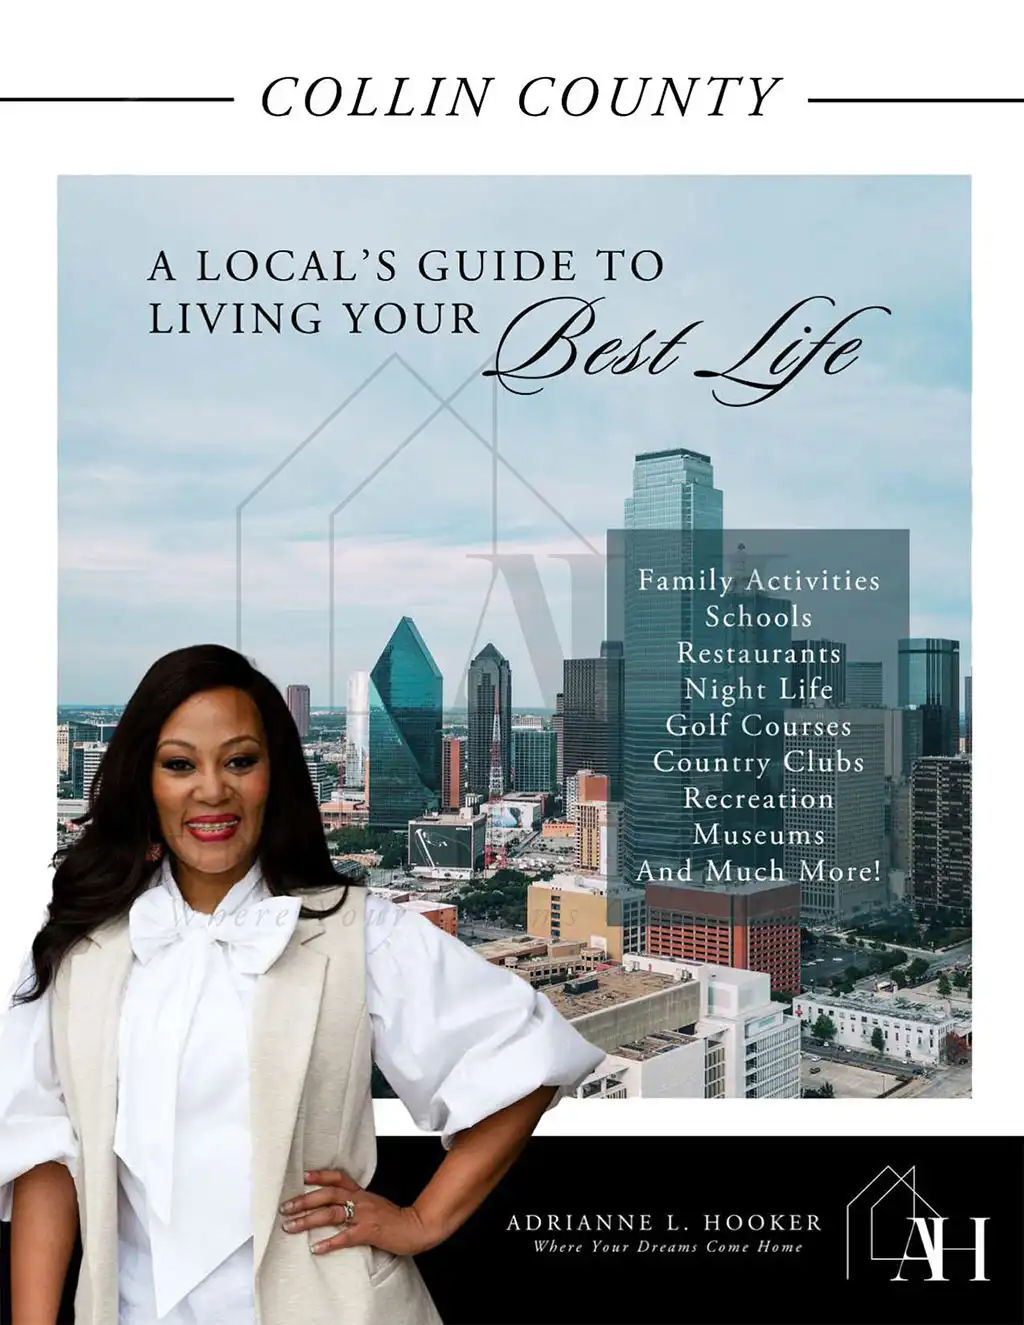 Ellis County: A Local’s Guide To Living Your Best Life